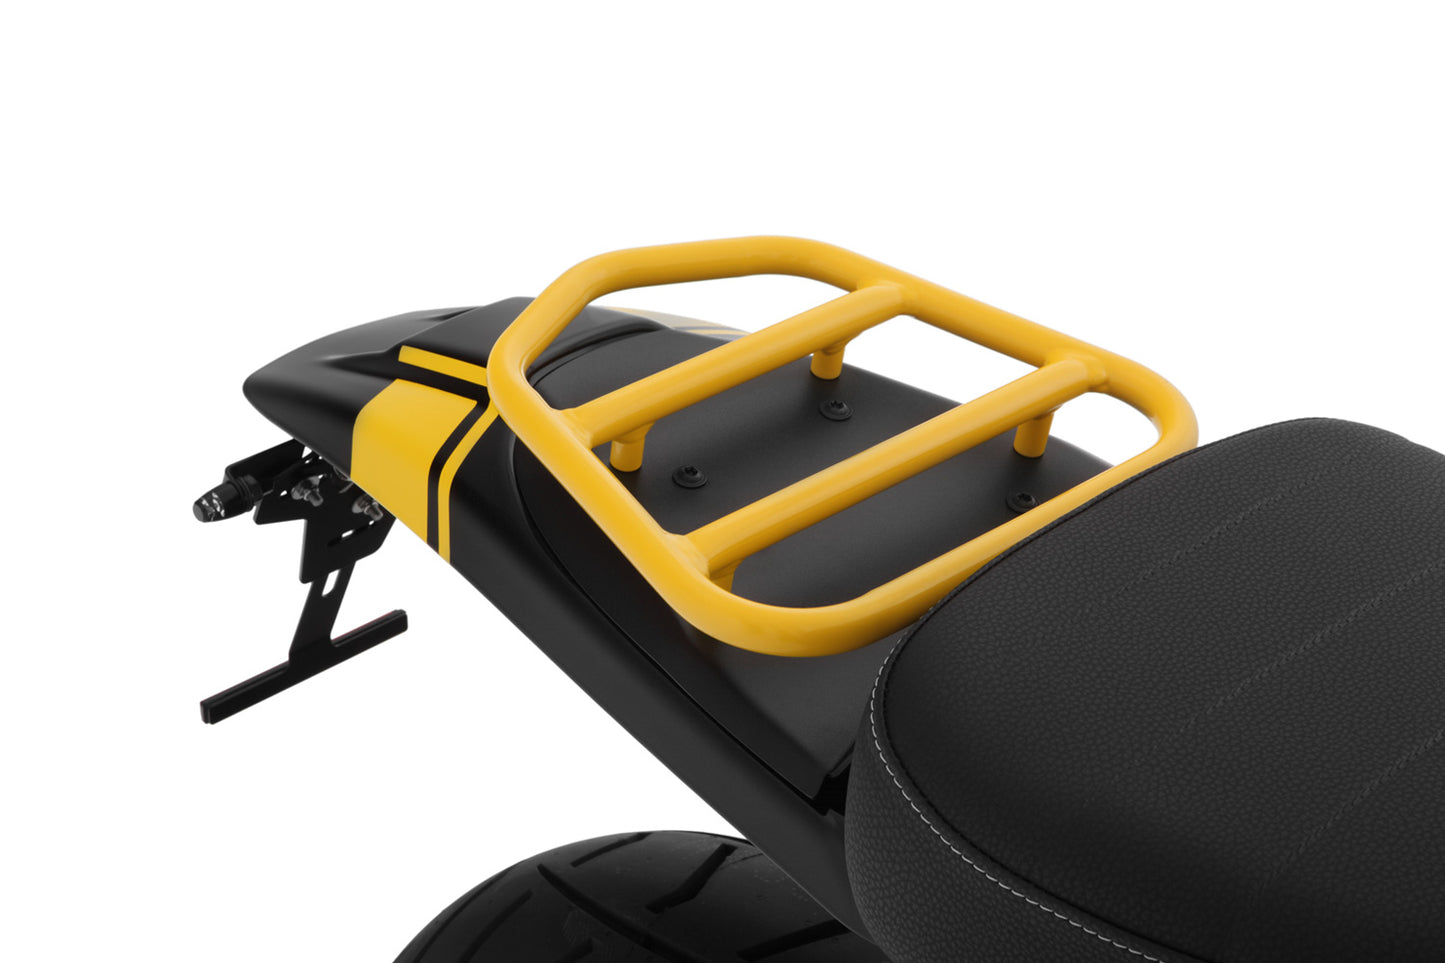 Wunderlich pillion luggage rack “Rallye” - without passenger frame - yellow | Edition 40 Years GS